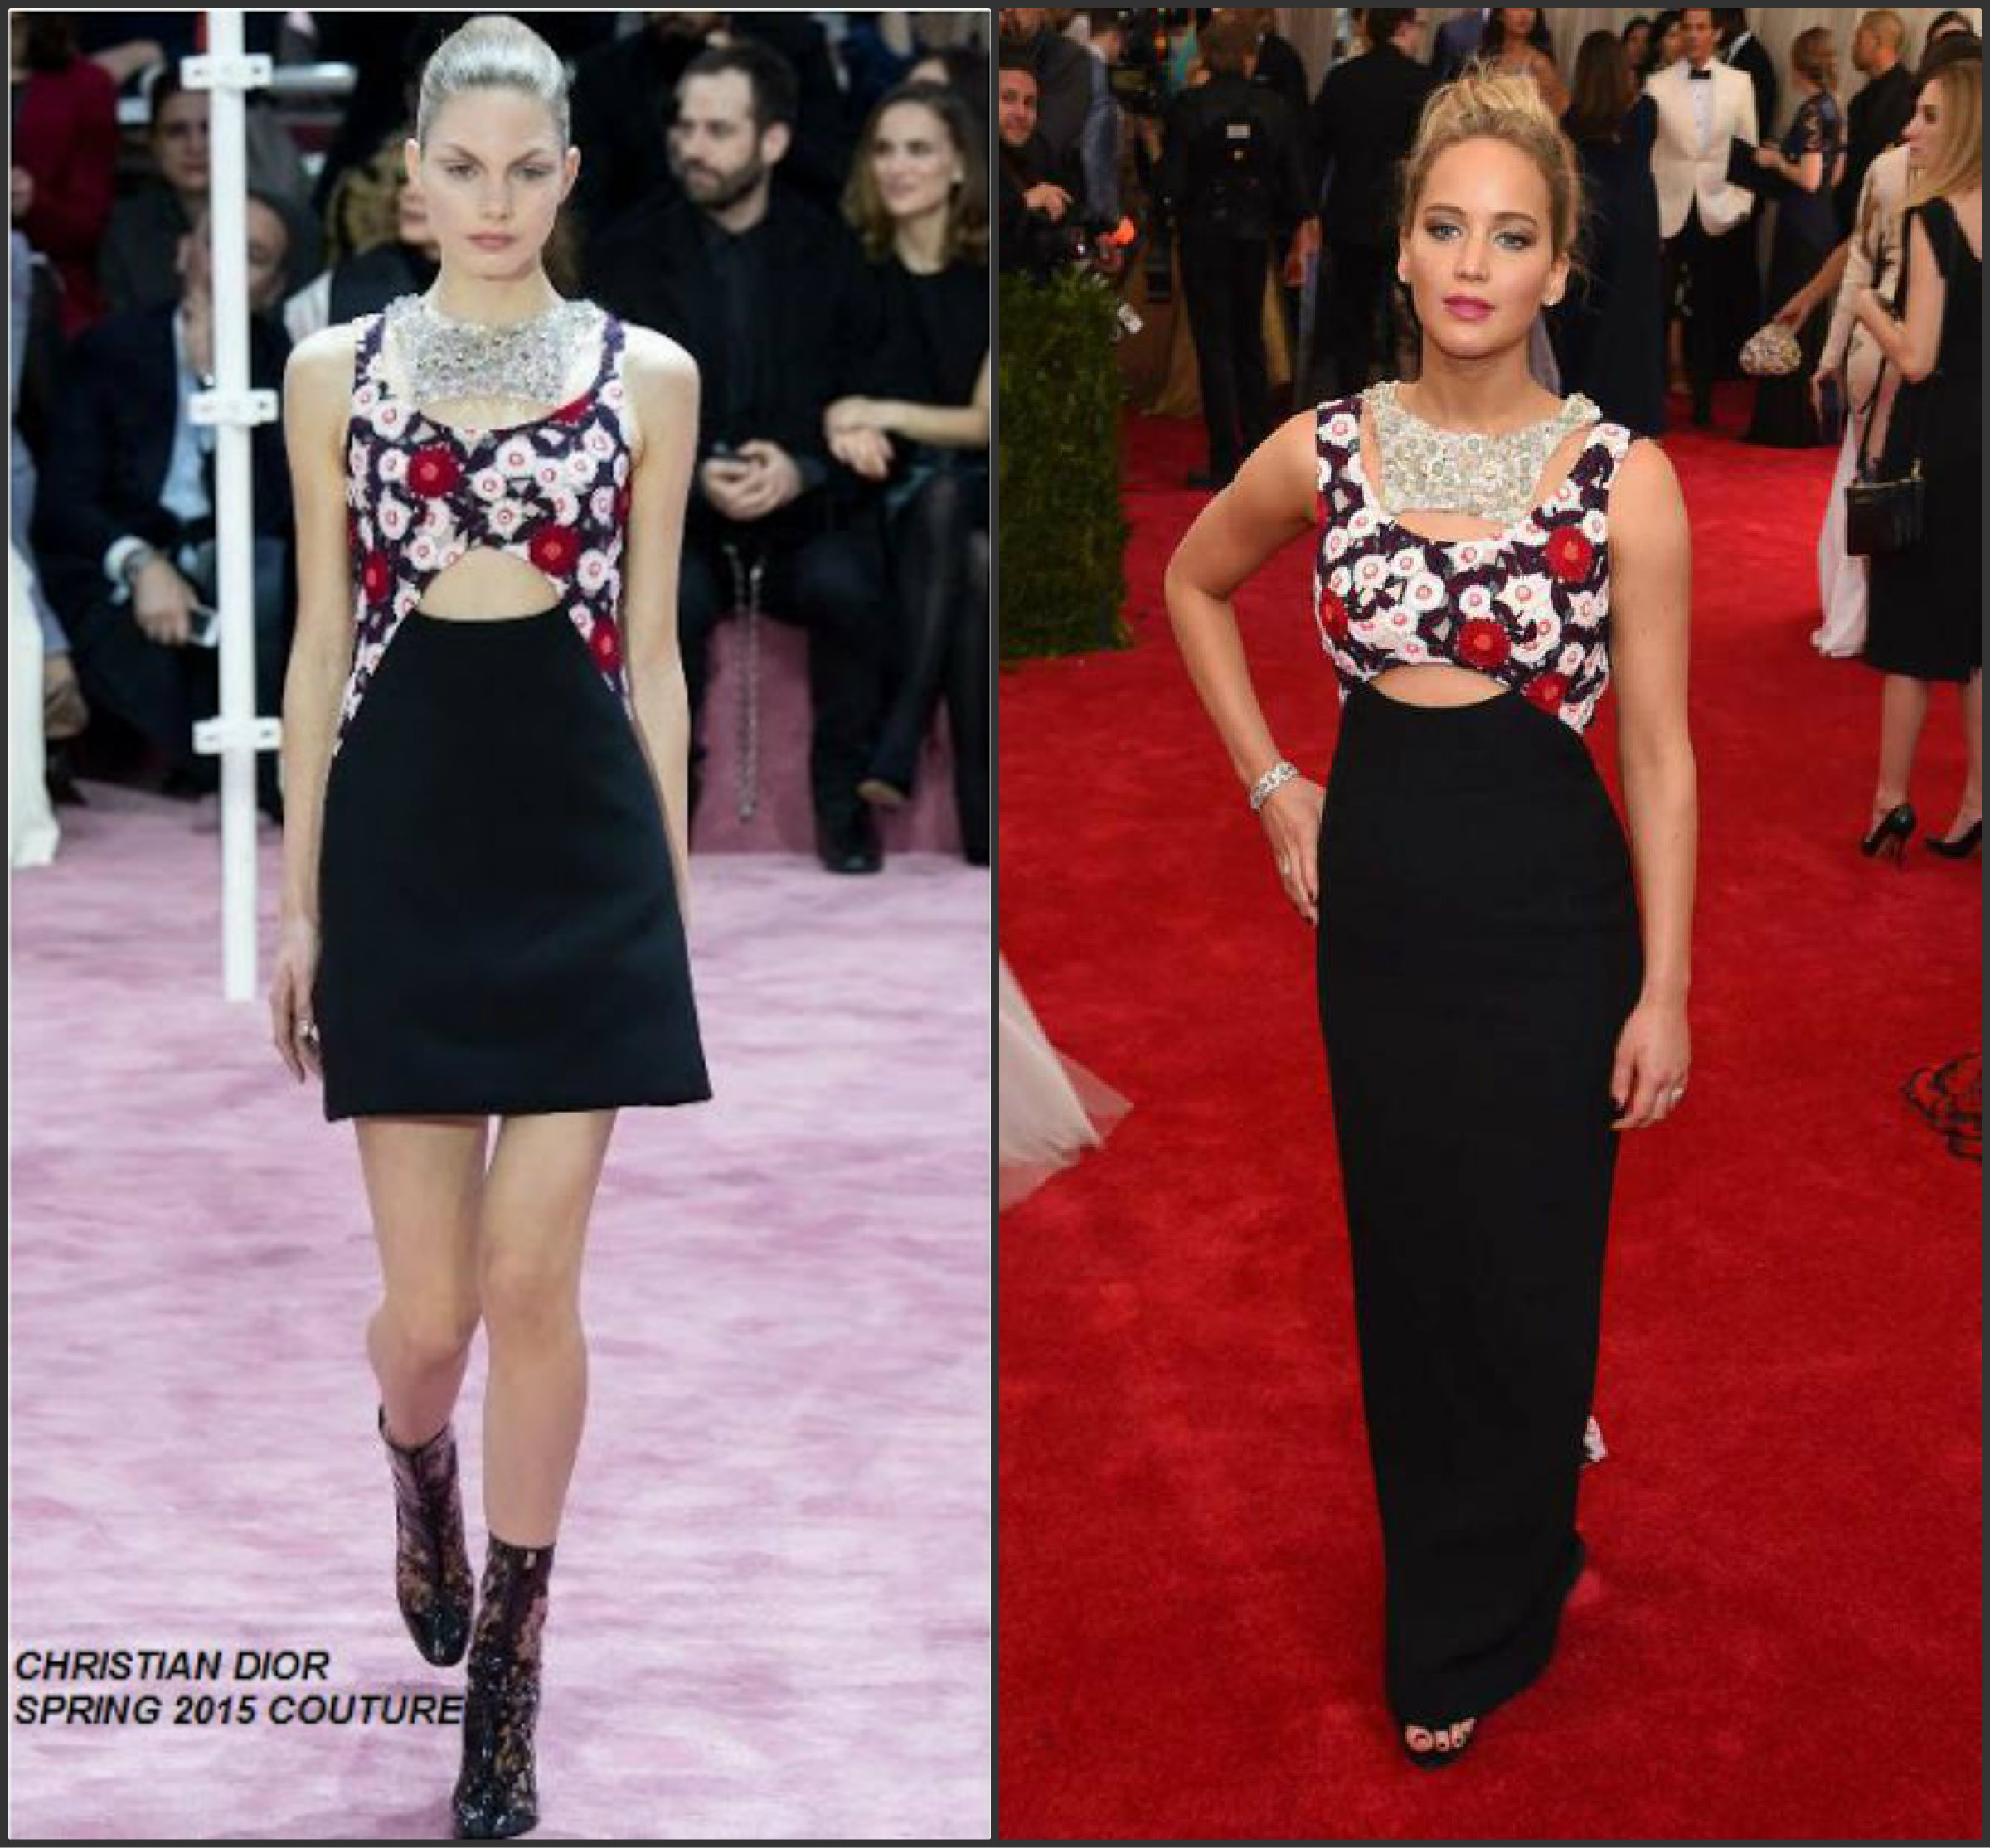 jennifer-lawrence-in-Christian-dior-at-the-2015-met-gala